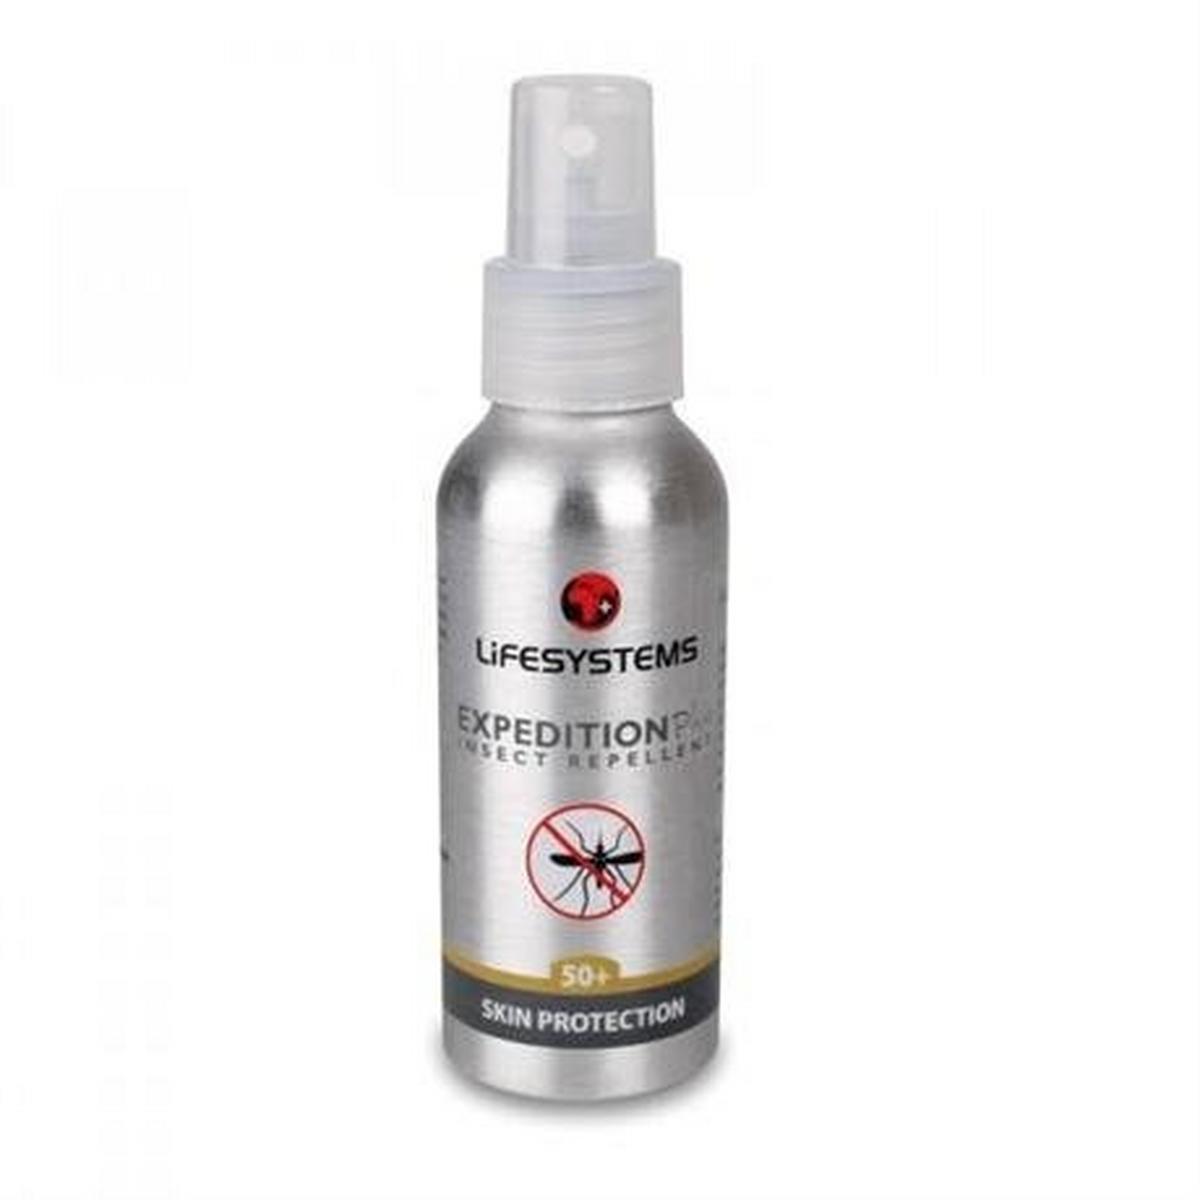 Lifesystems Expedition + Plus Insect Repellent 50ml Spray